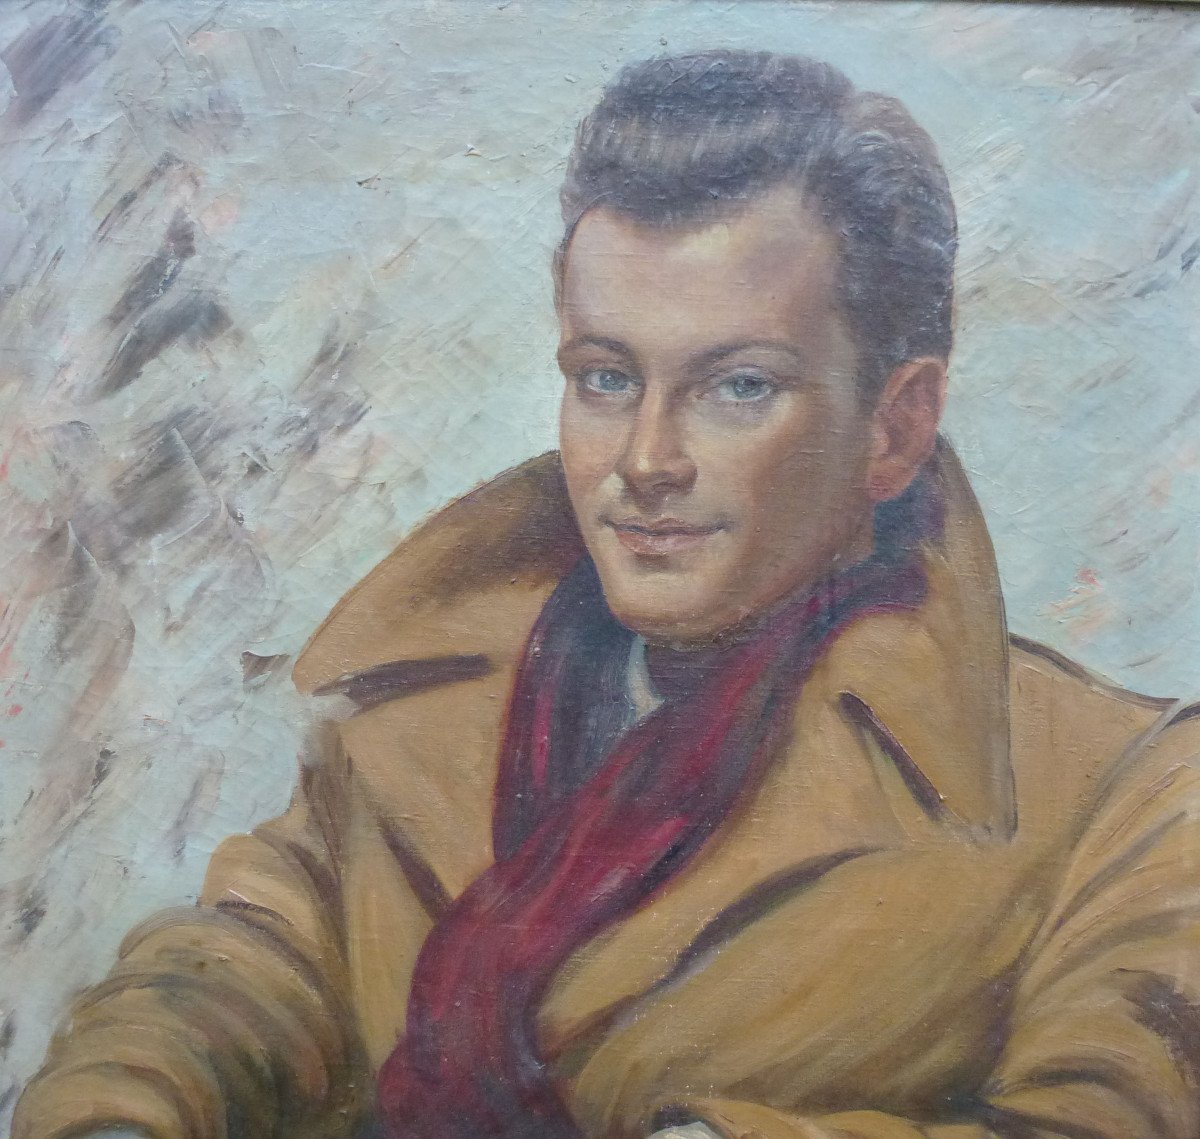 R. Dancourtportrait Of Man Oil On Canvas From The 20th Century Signed-photo-4